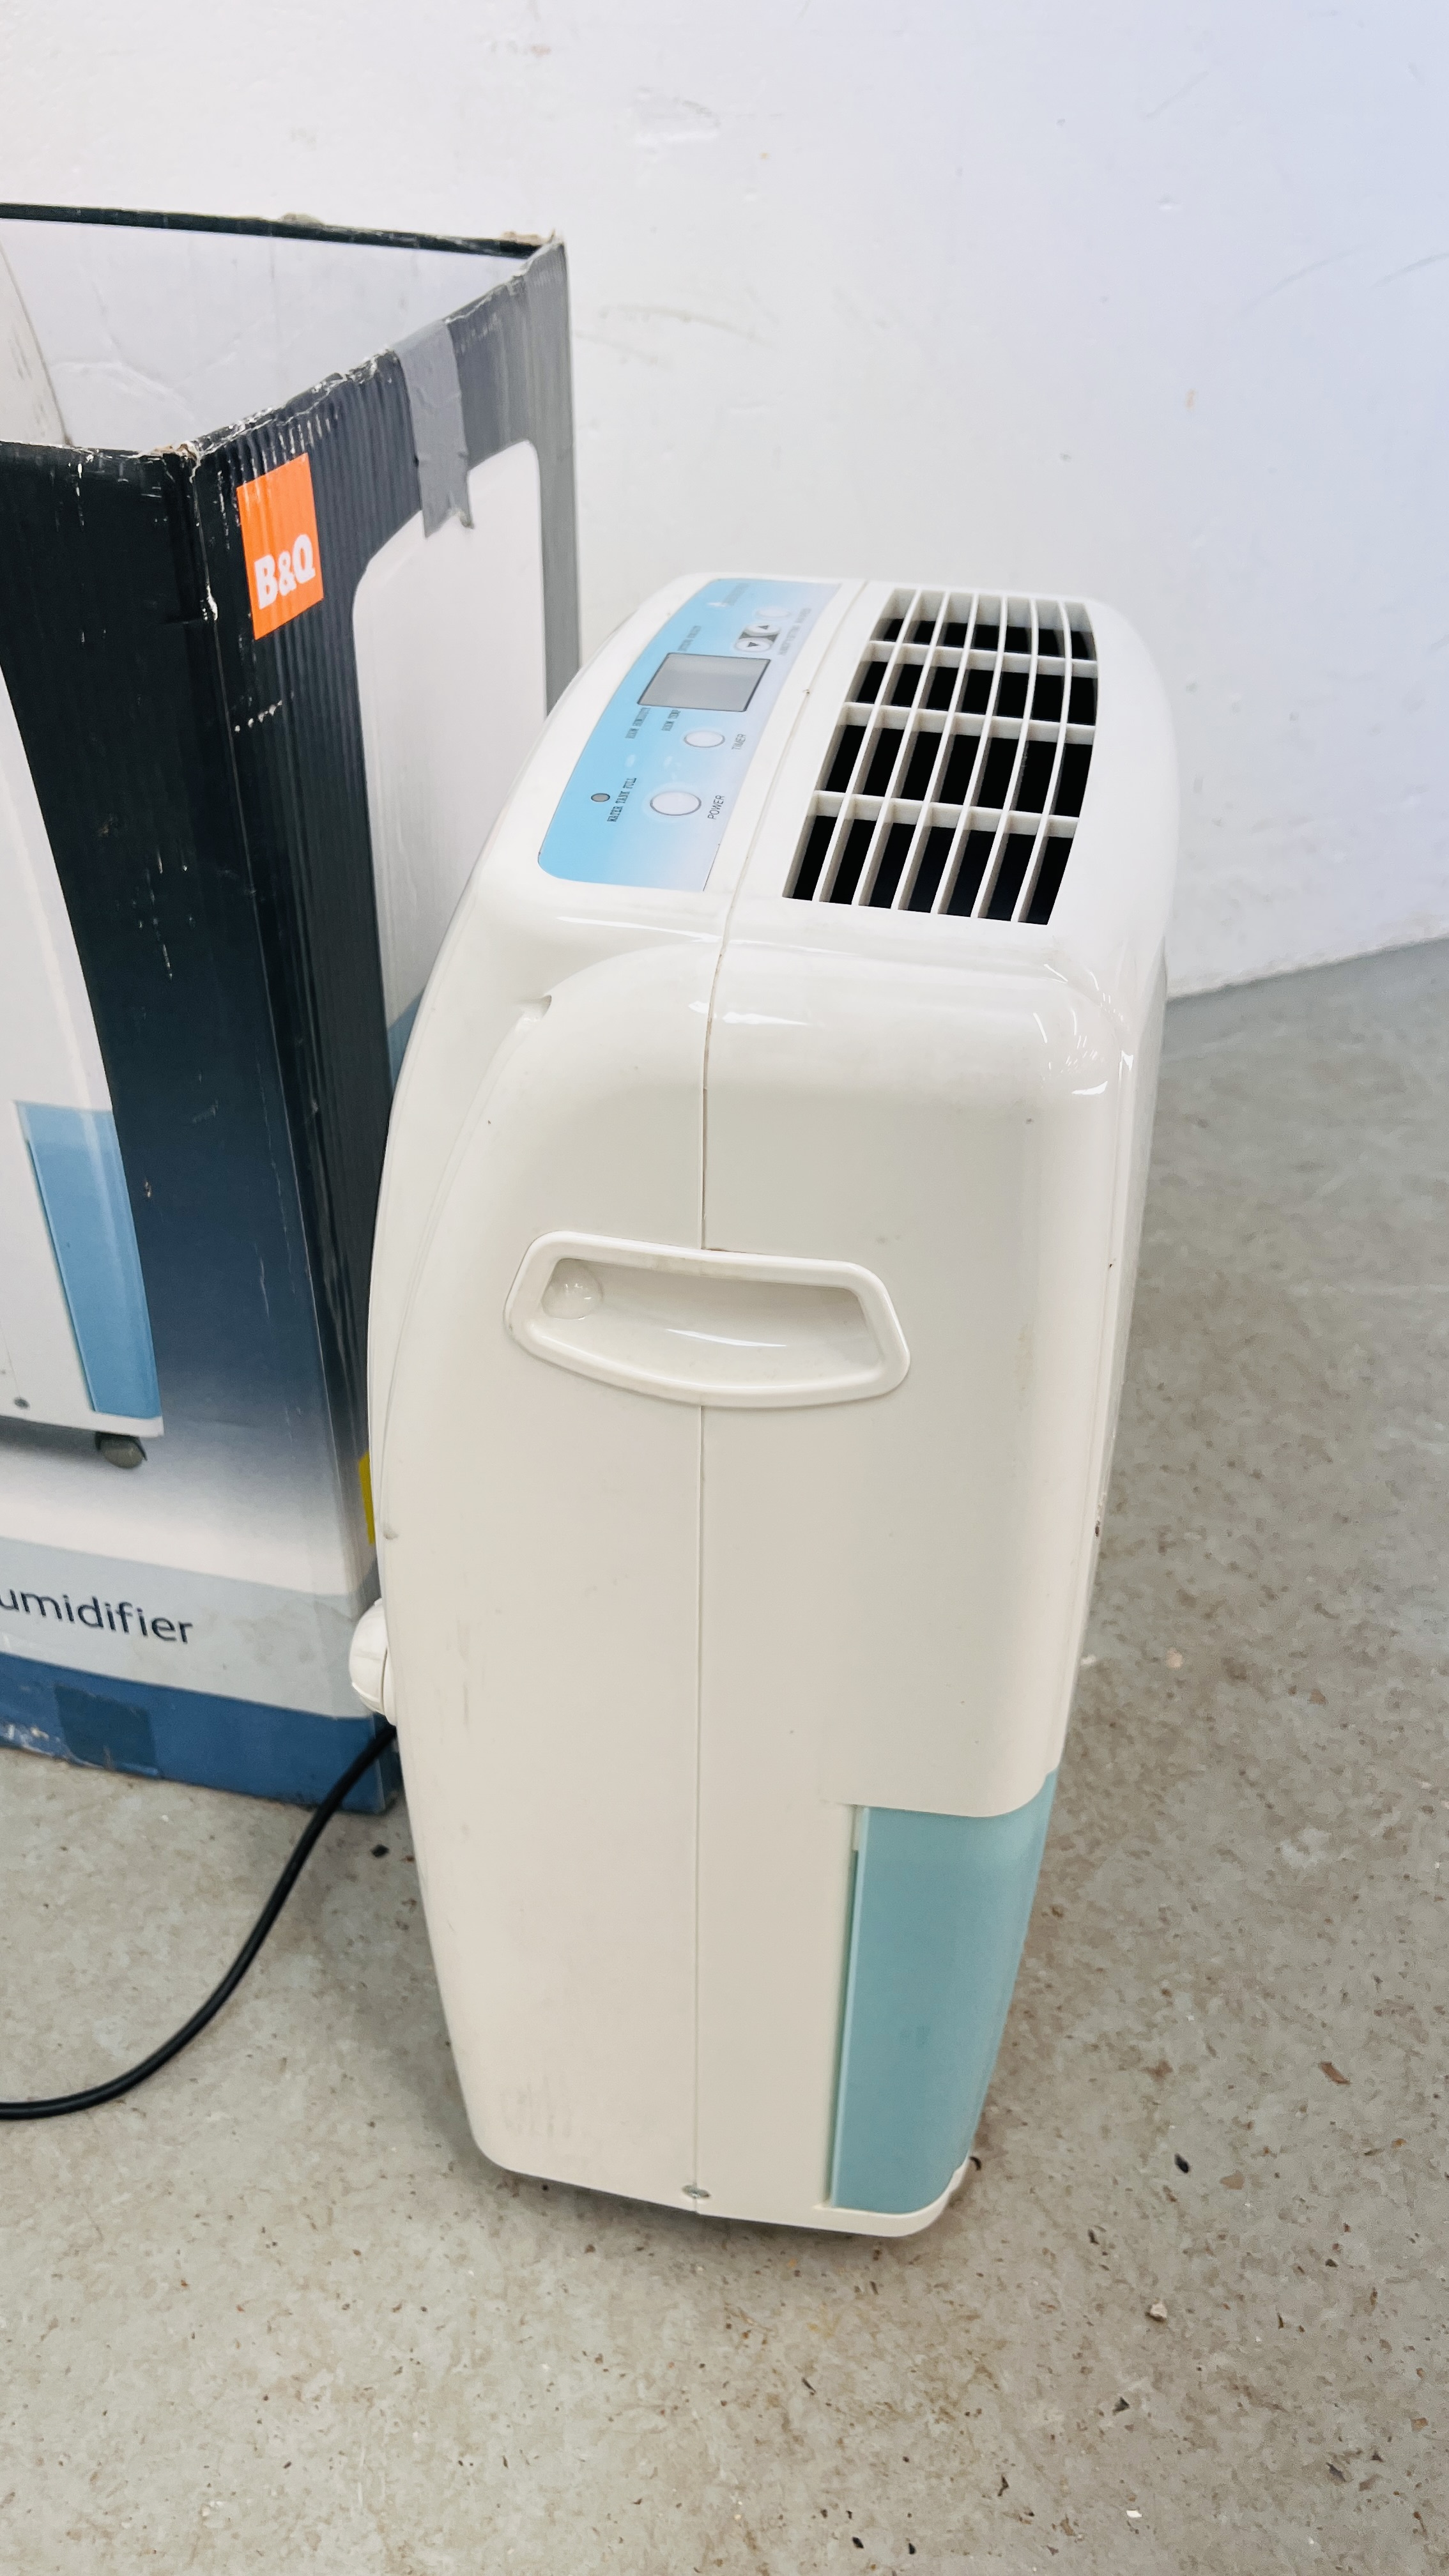 A 16L DEHUMIDIFIER ALONG WITH ORIGINAL BOX - SOLD AS SEEN. - Image 4 of 5